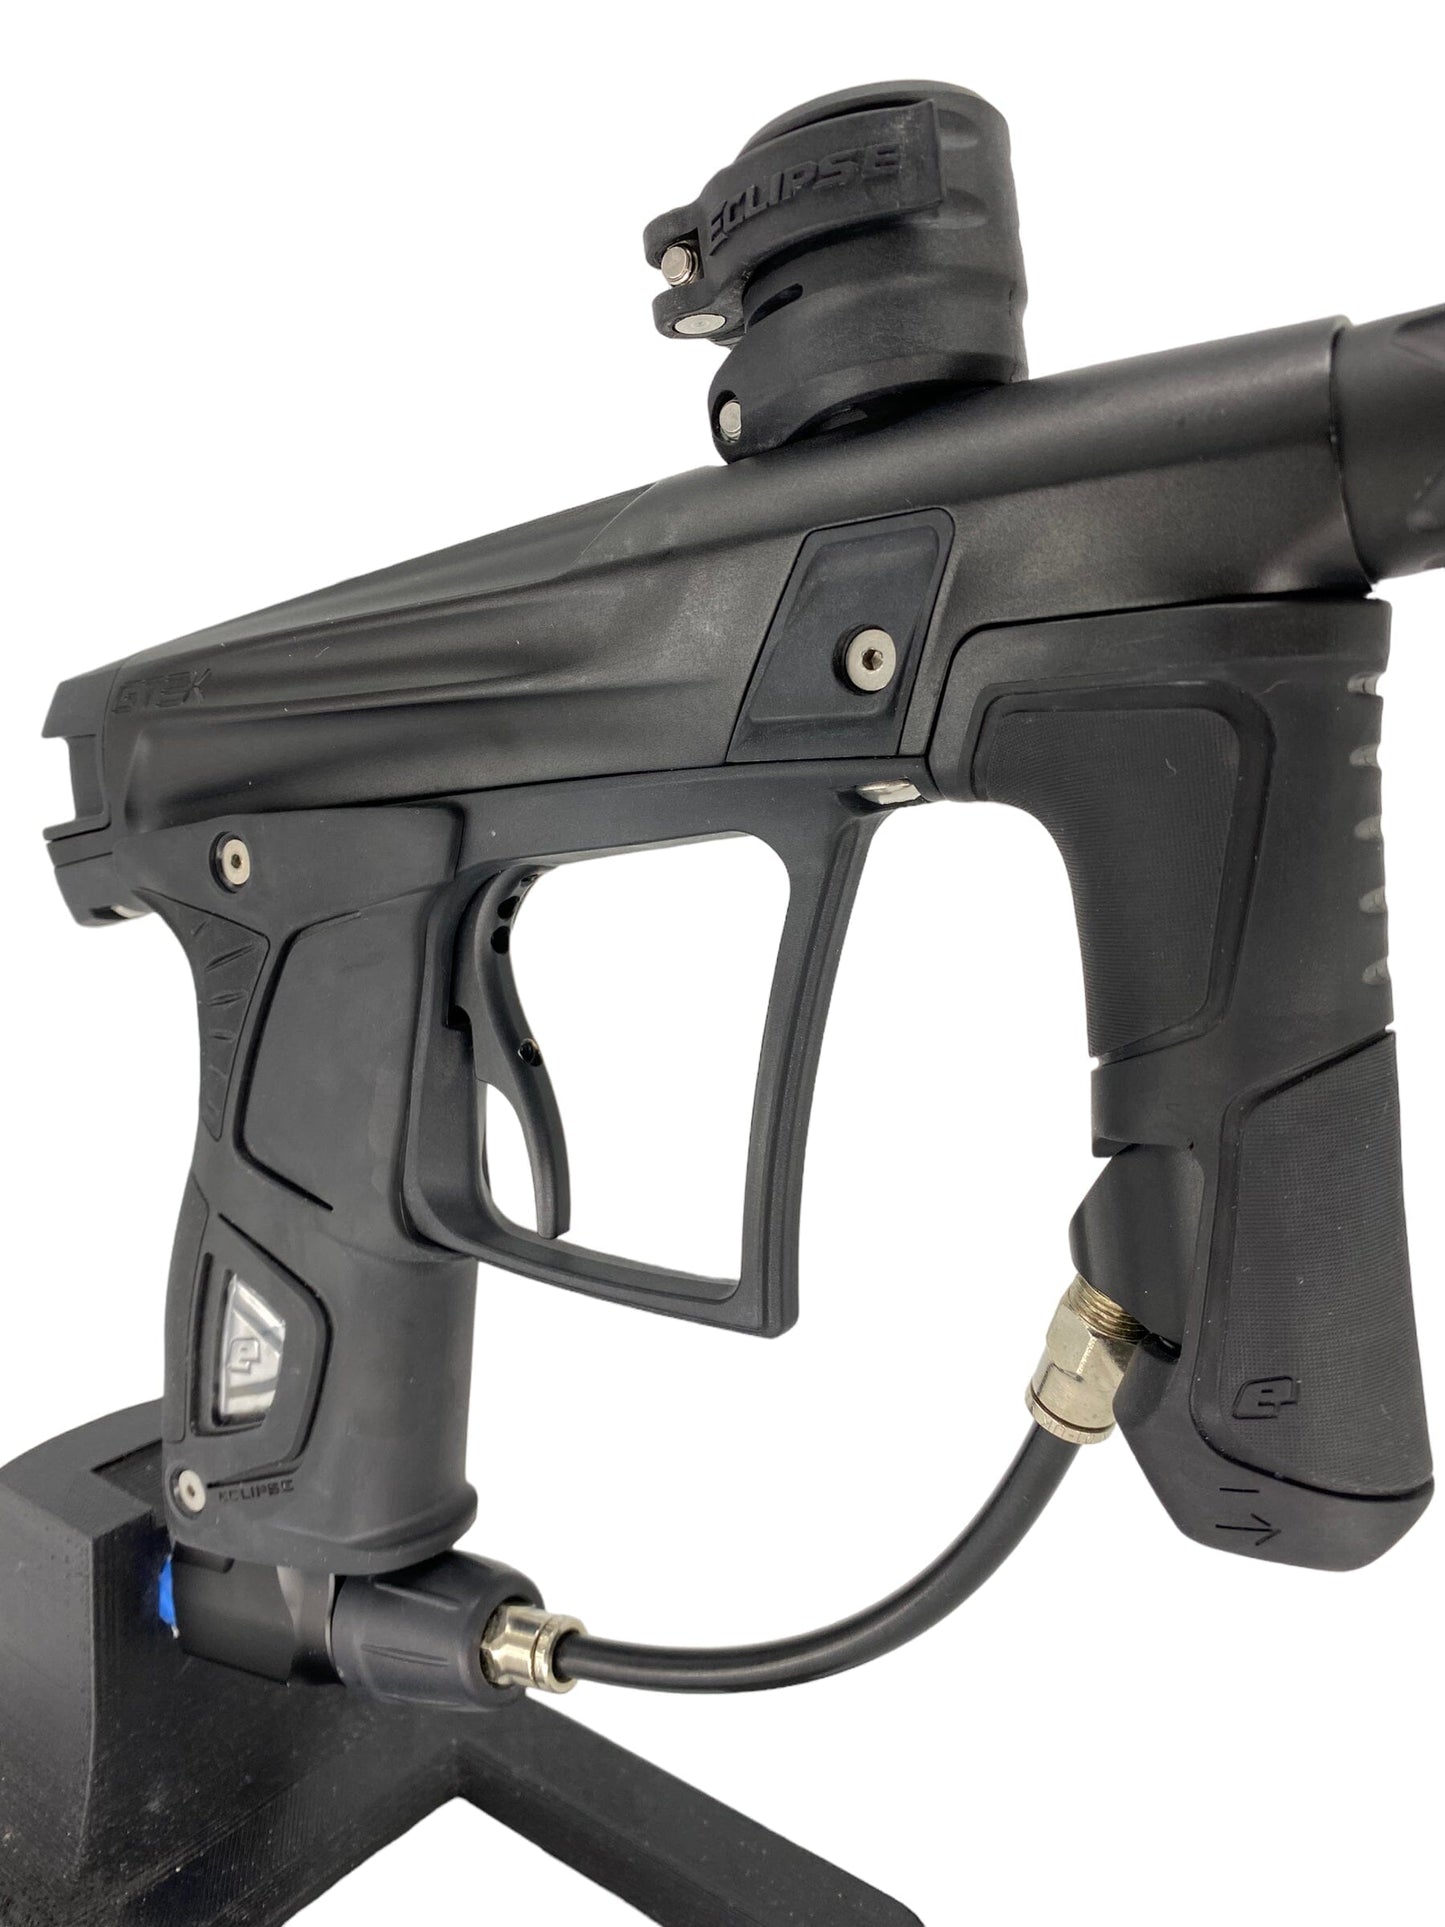 Used Planet Eclipse Gtek Paintball Gun from CPXBrosPaintball Buy/Sell/Trade Paintball Markers, Paintball Hoppers, Paintball Masks, and Hormesis Headbands